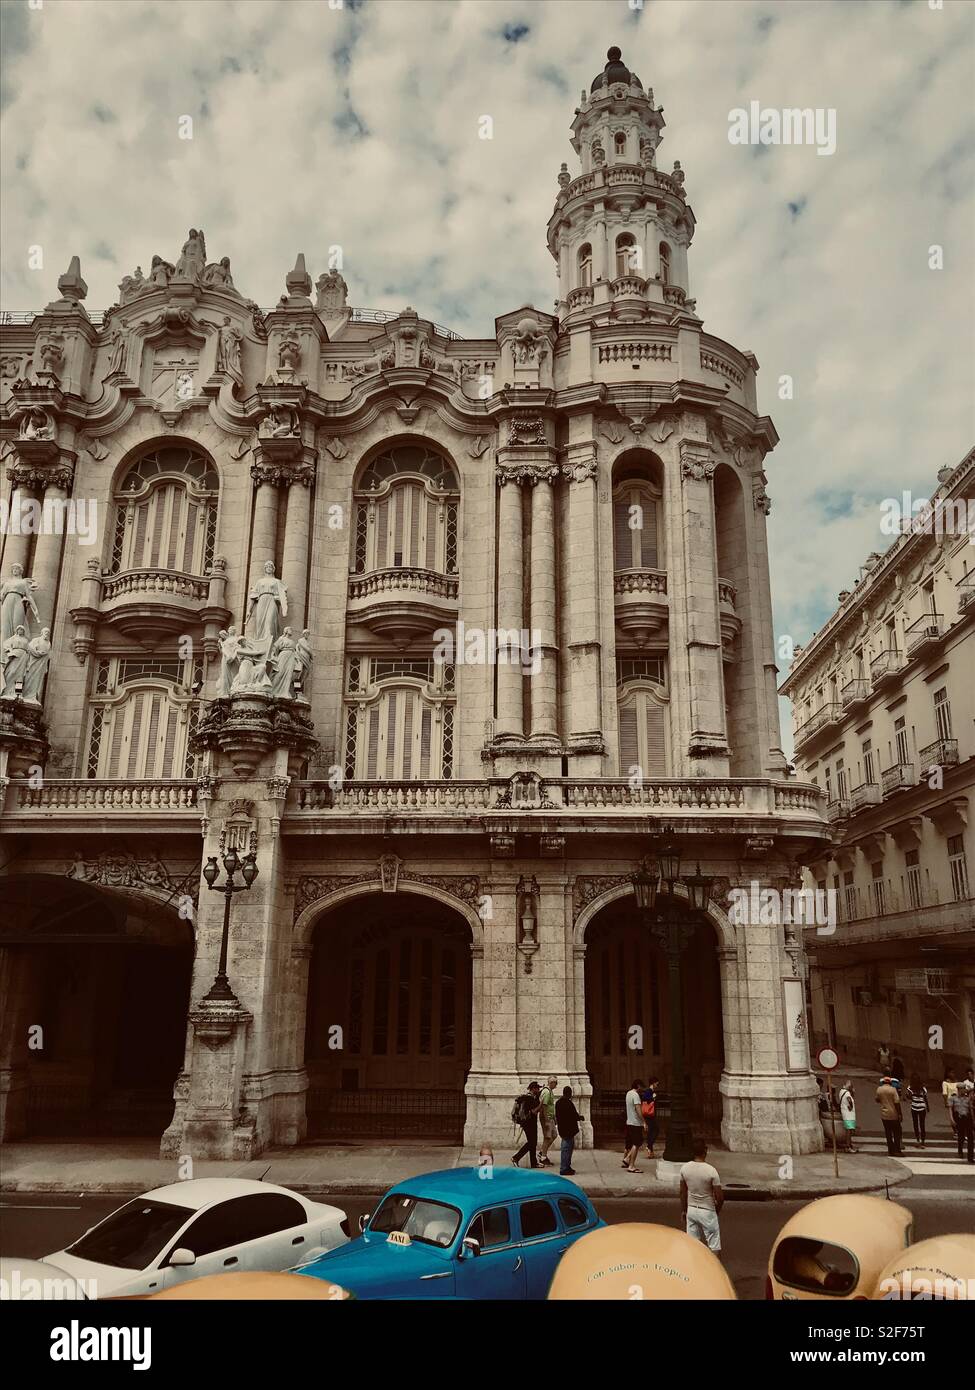 Gran Teatro de La Habana, one of the world’s largest opera houses, the theatre hosts the Cuba National Ballet and Opera. Designed by Belgian architect, Paul Belau, the theater faces Parque Central. Stock Photo